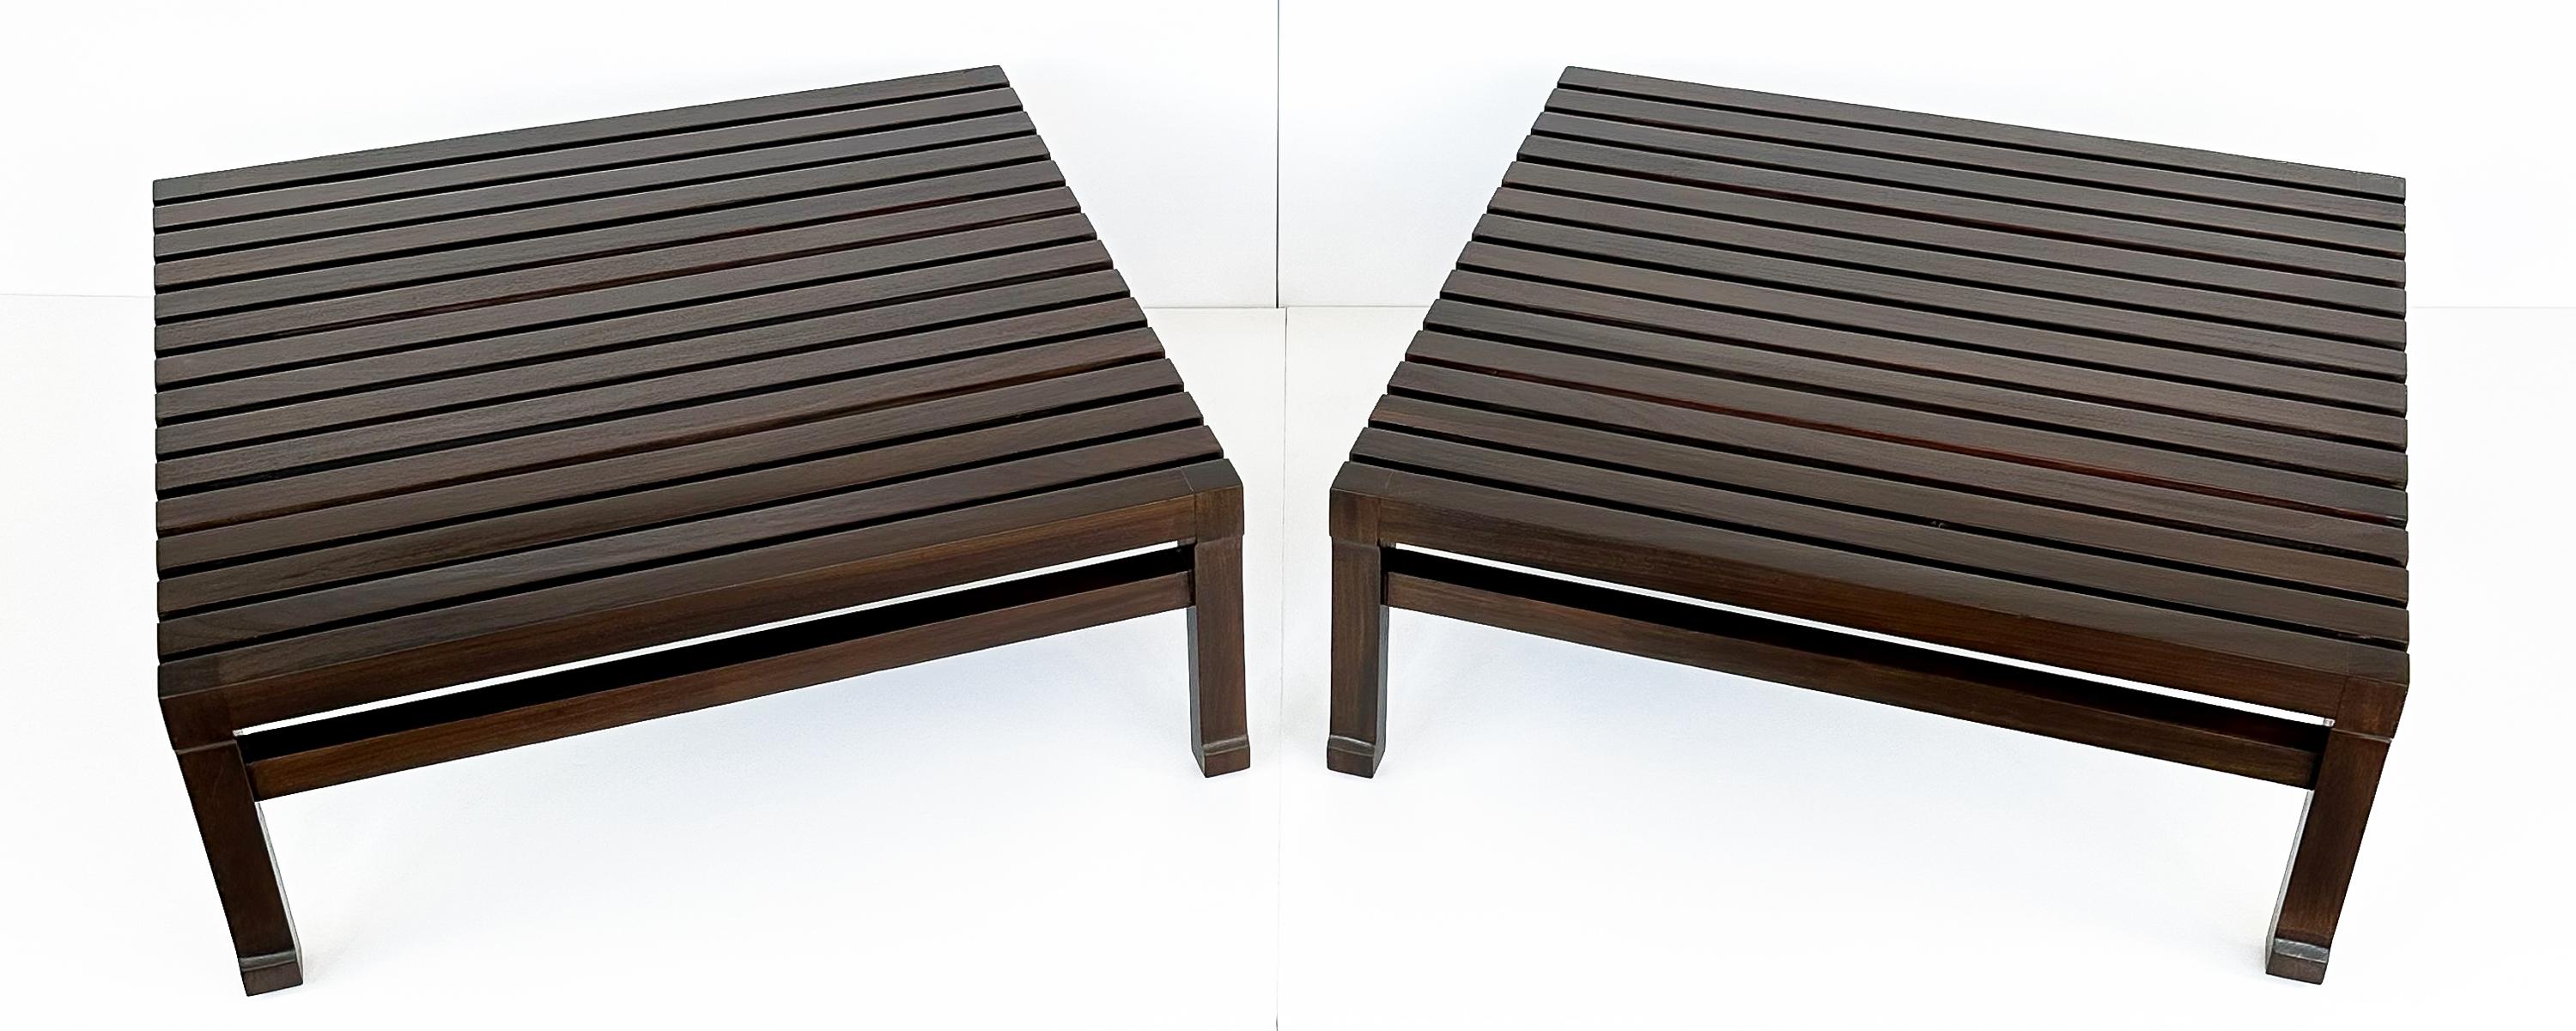 Pair of Italian Low Slatted End Tables or Coffee Tables 1